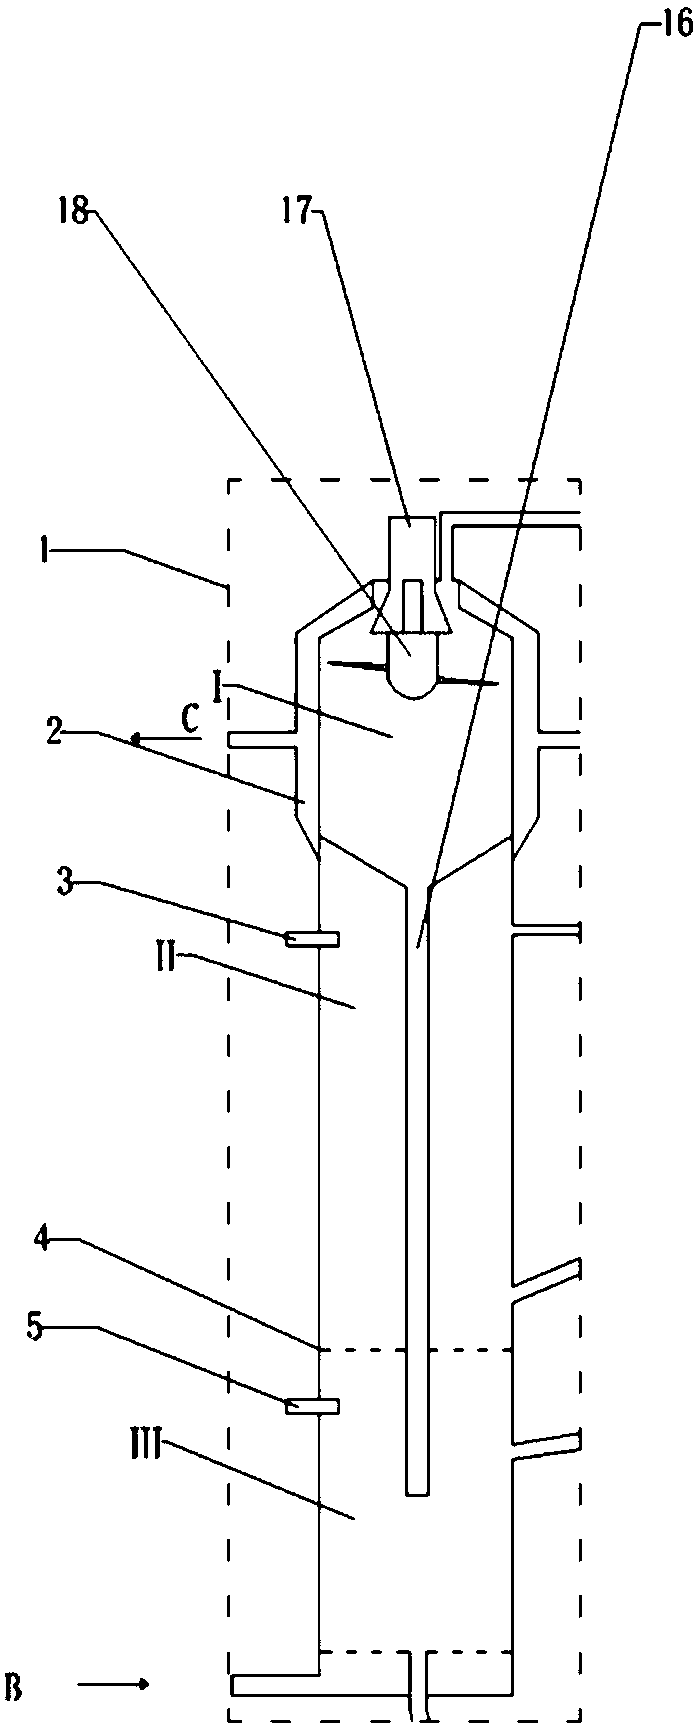 Chemical-looping-based carbon-based fuel graded combustion and dry distillation device and method